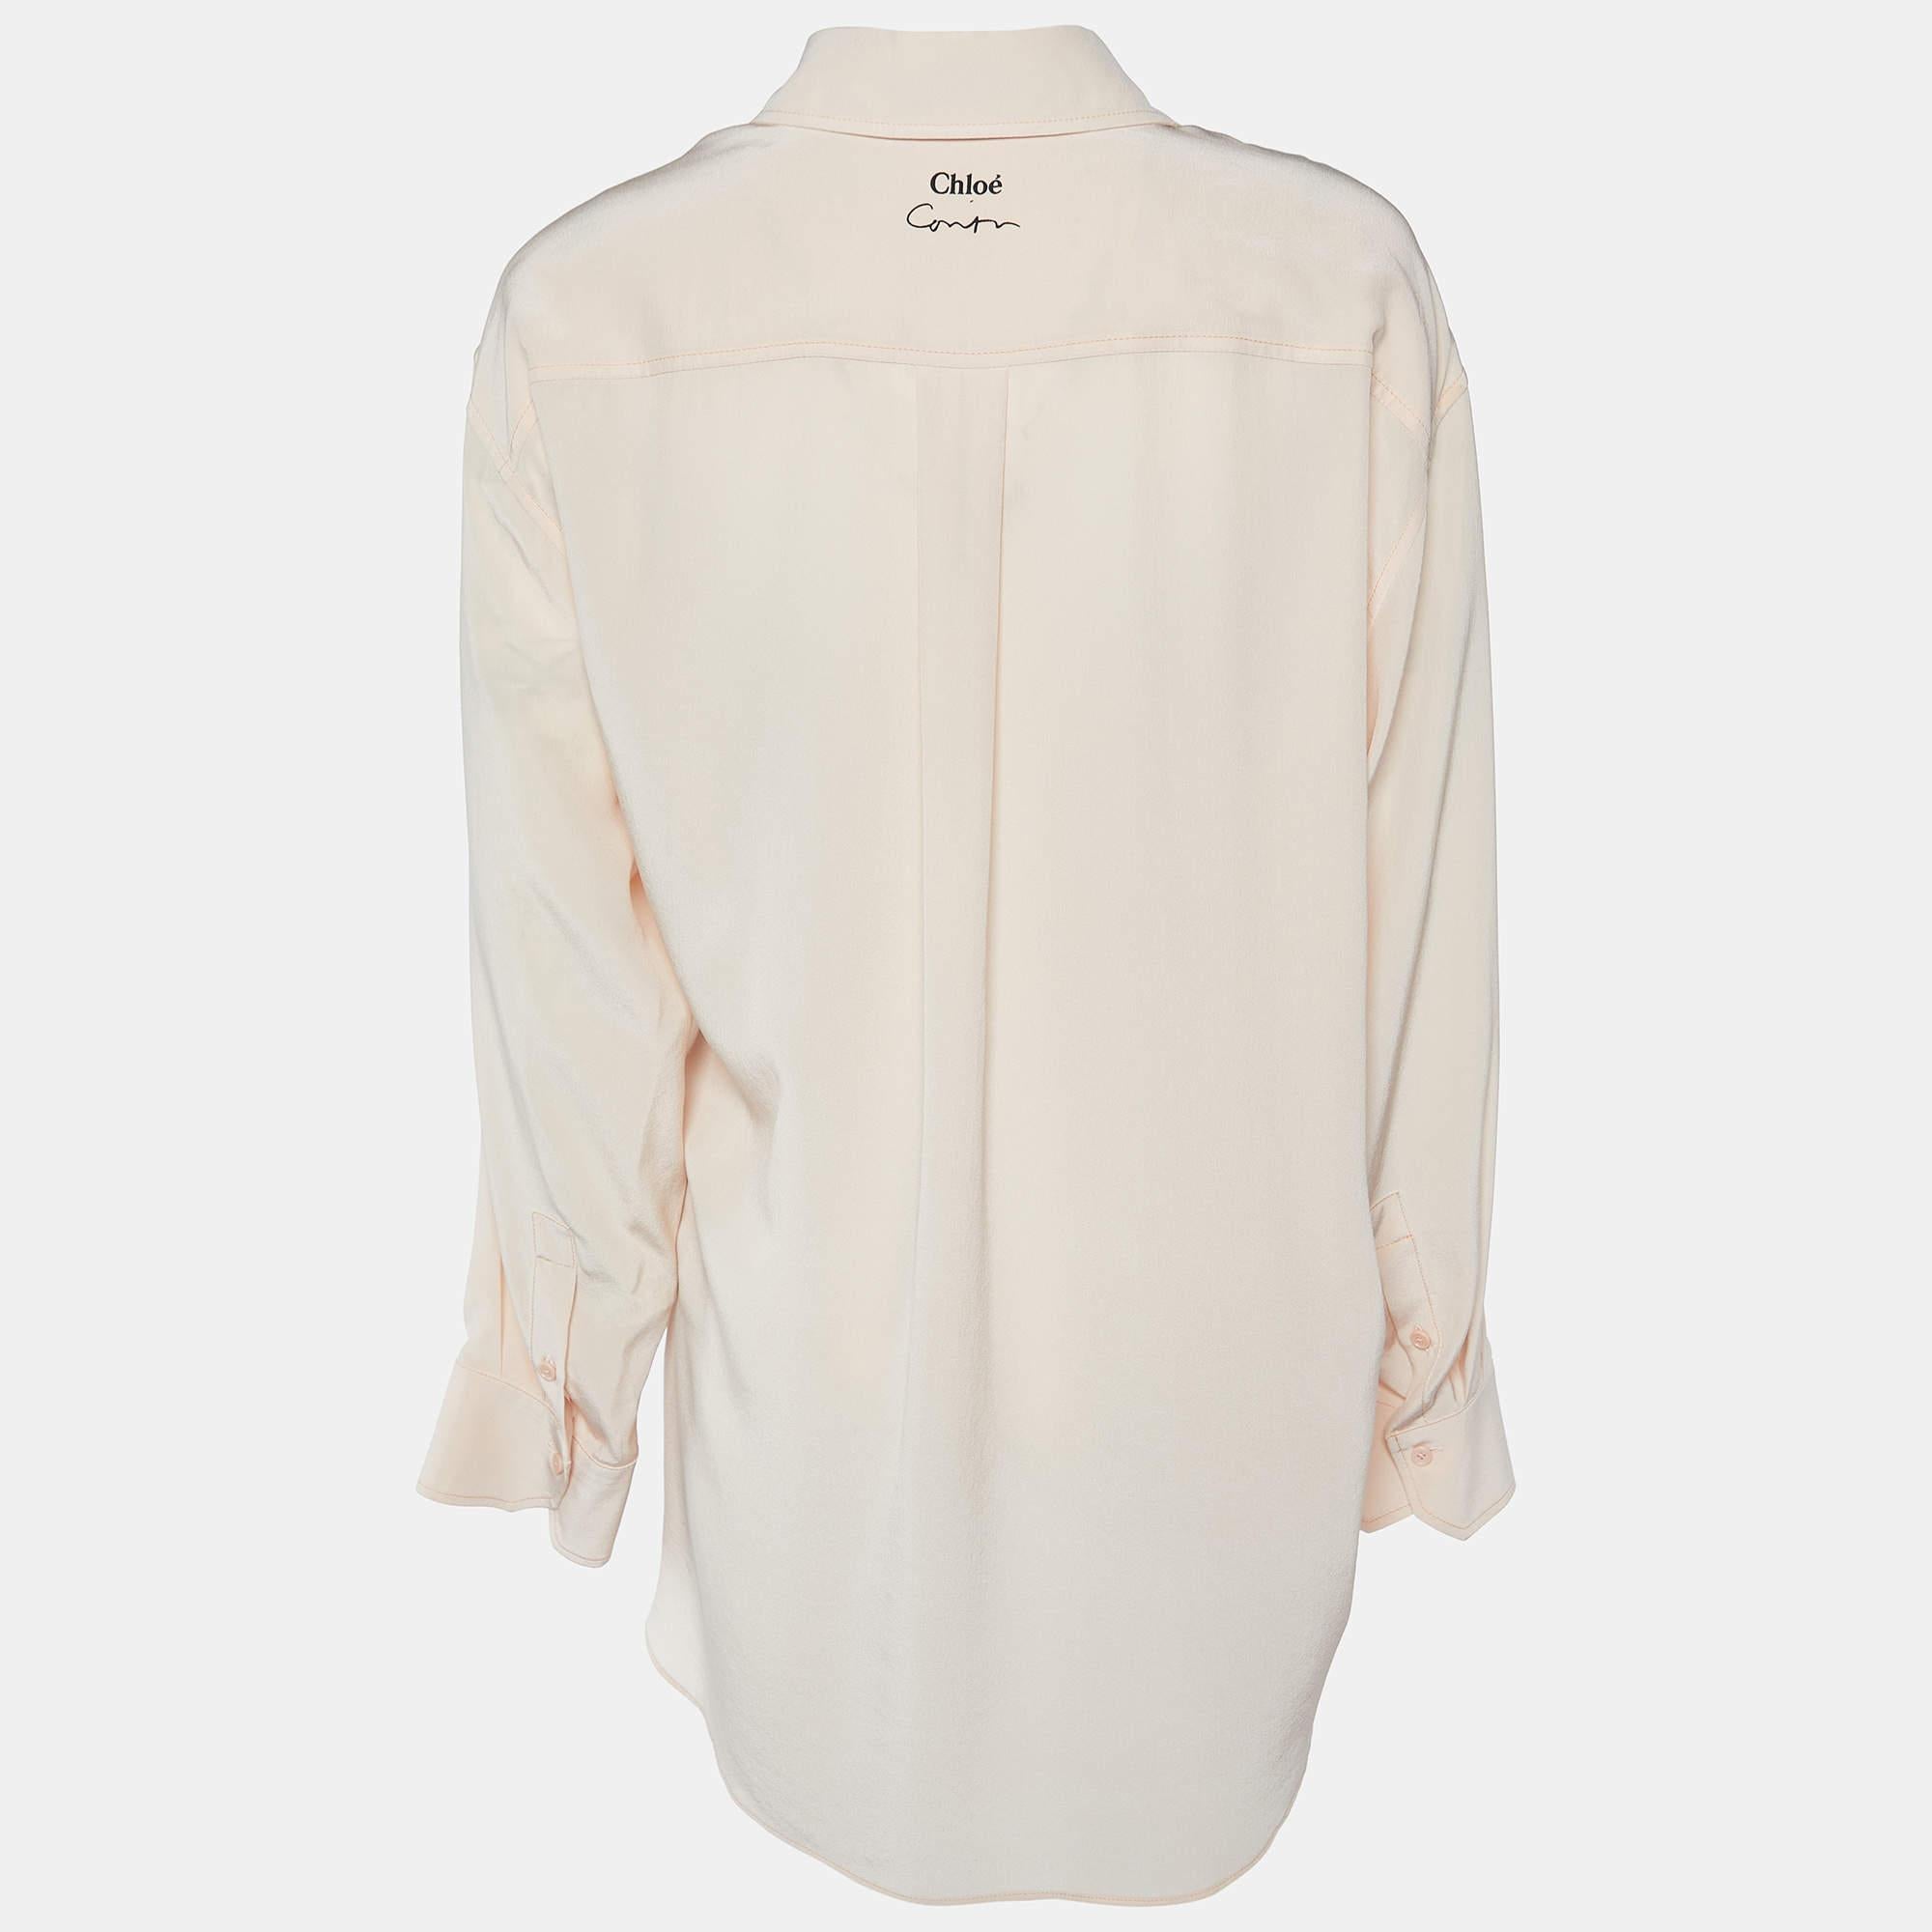 A delightful creation from Chloe x Corita Kent, this shirt strikes right balance between style and comfort. It is decorated with chick slogan detailing and flaunts long sleeves along with a comfortable fit.

